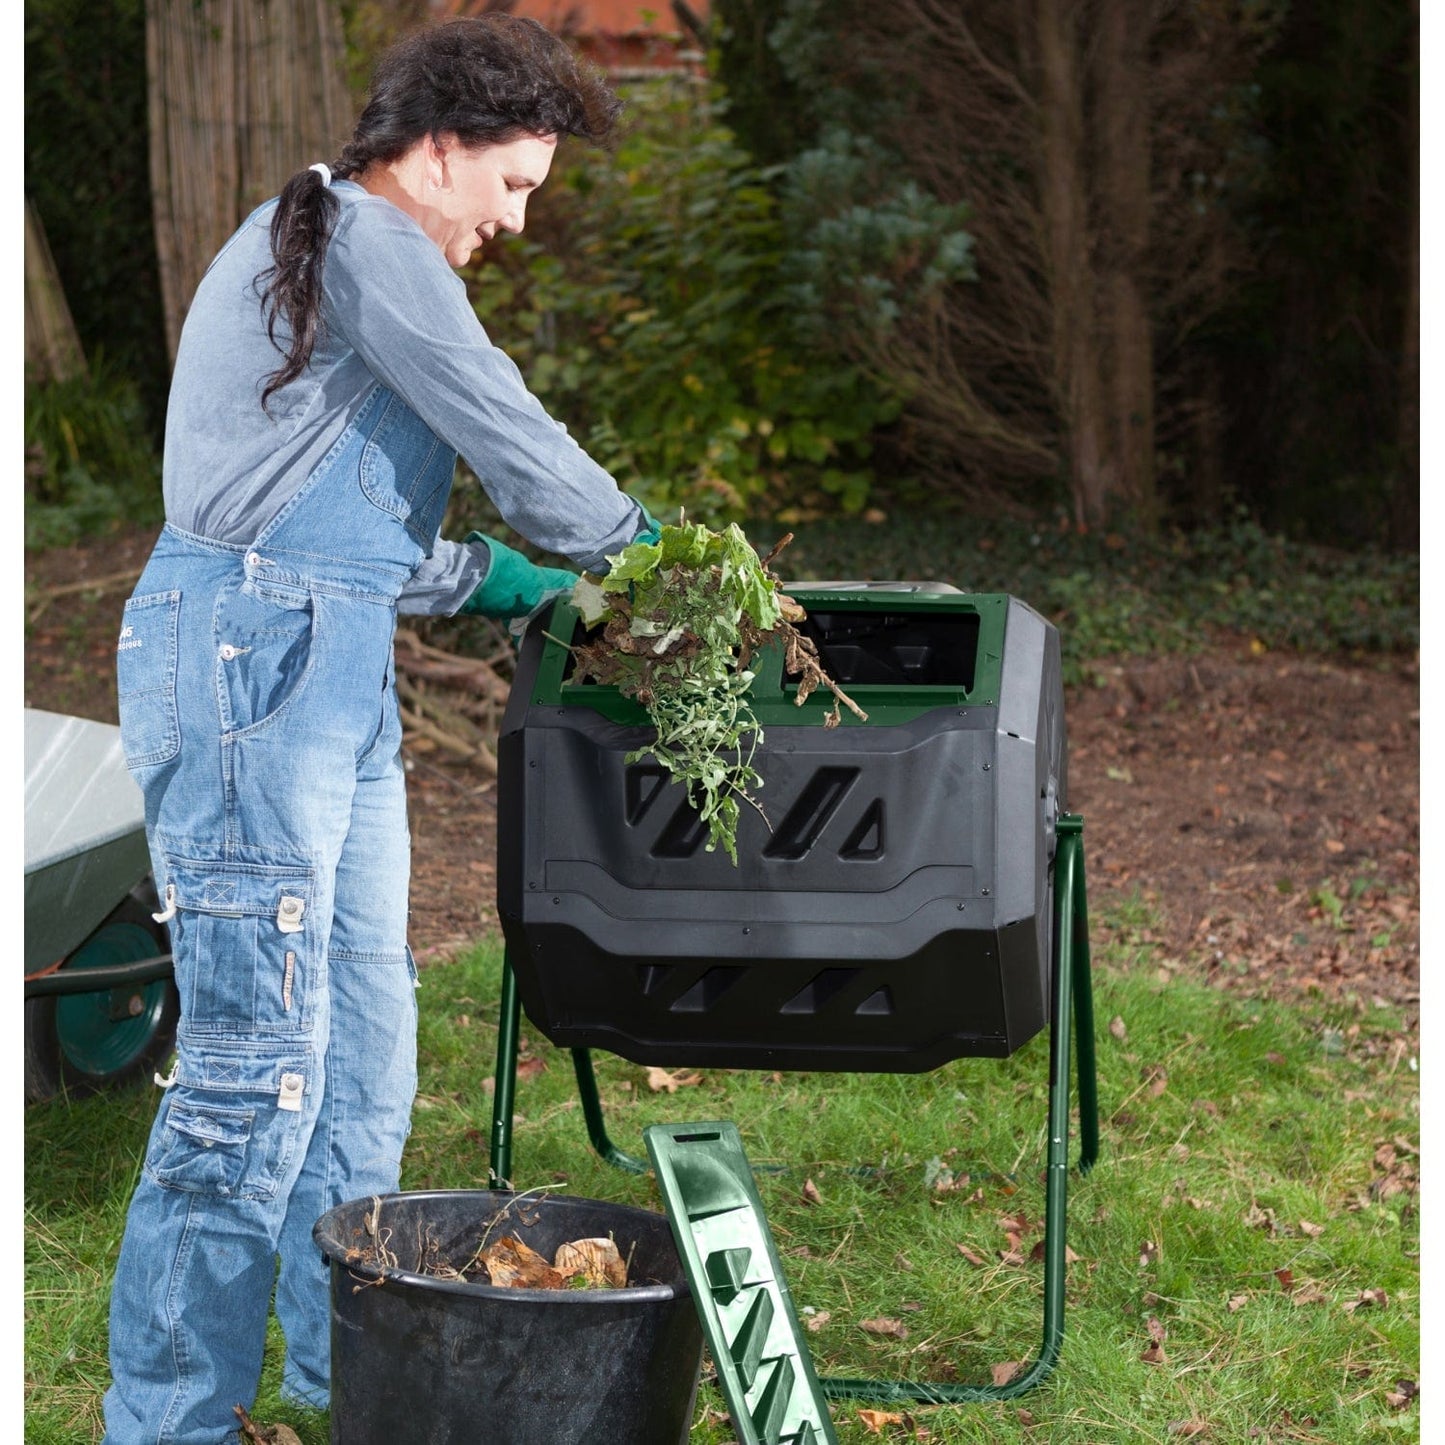 Exaco Composters Exaco | Mr. Spin® Compost Tumbler